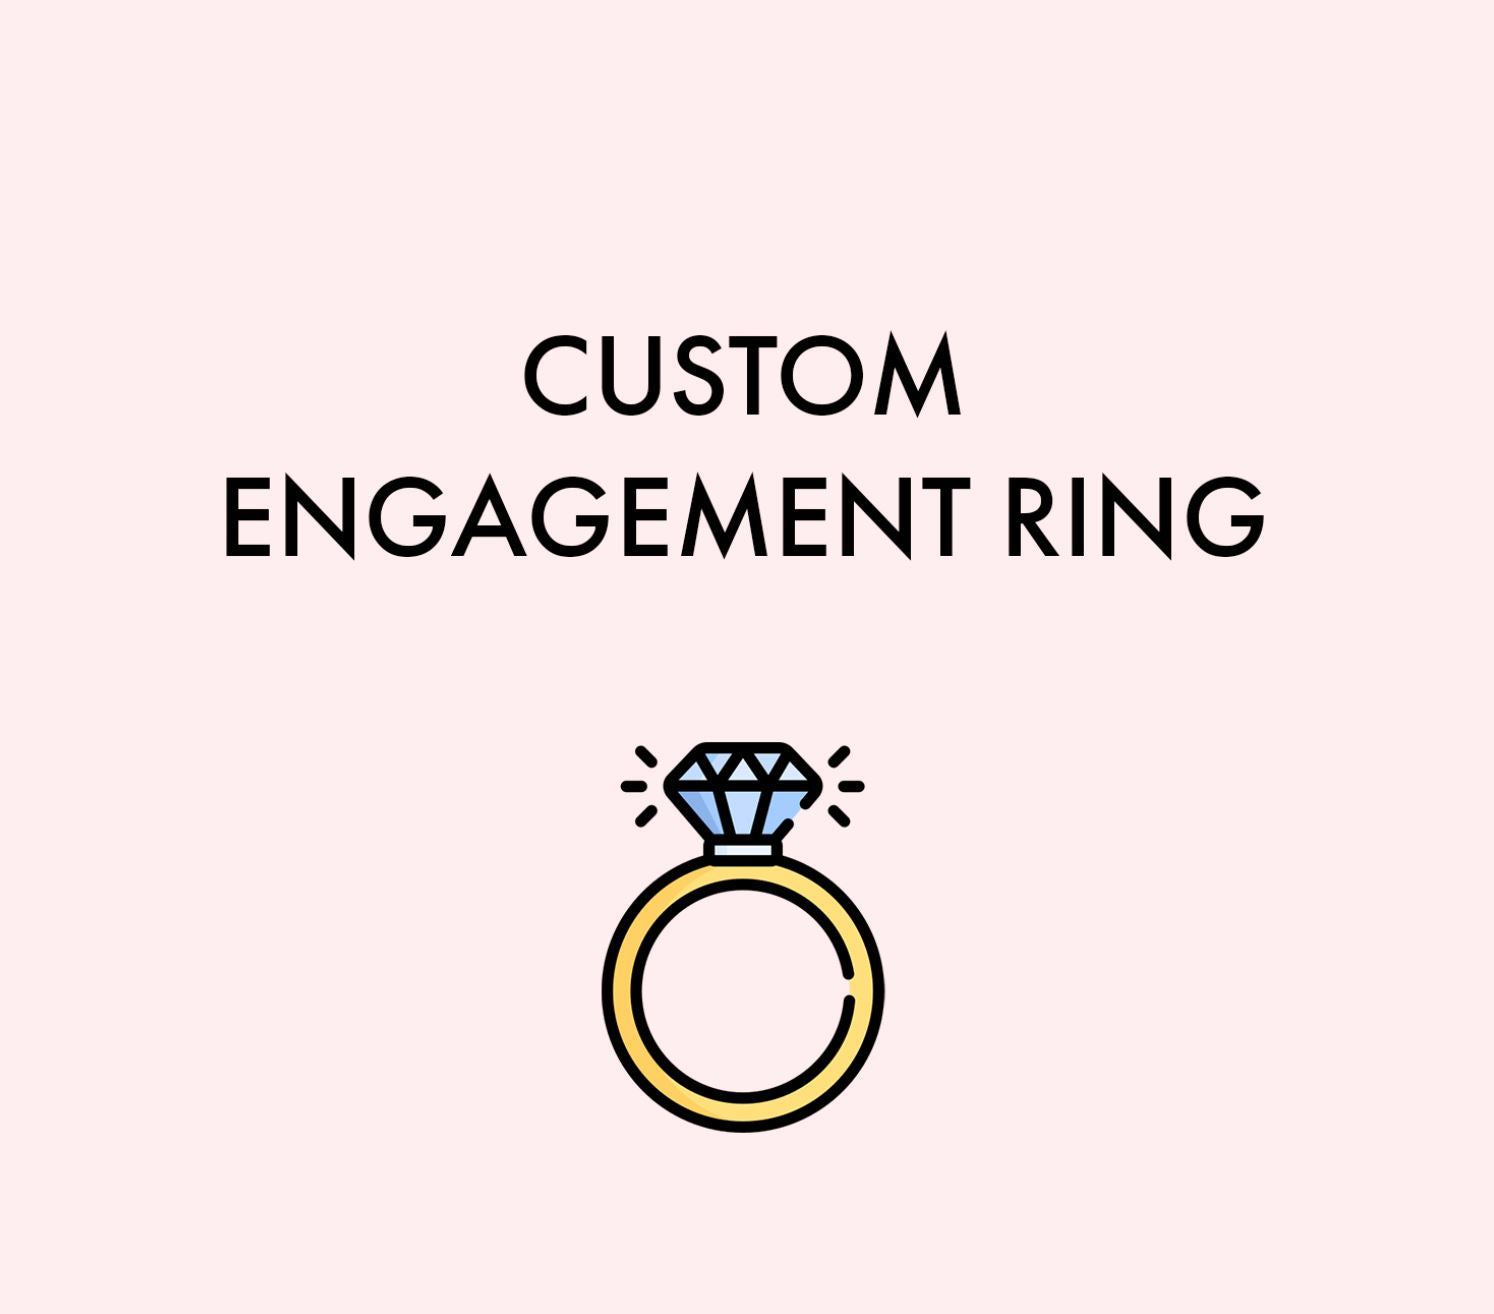 Custom Engagement Ring for Marc (11/27-23 pw) 3rd Final Payment Pending Princess Bride Diamonds 